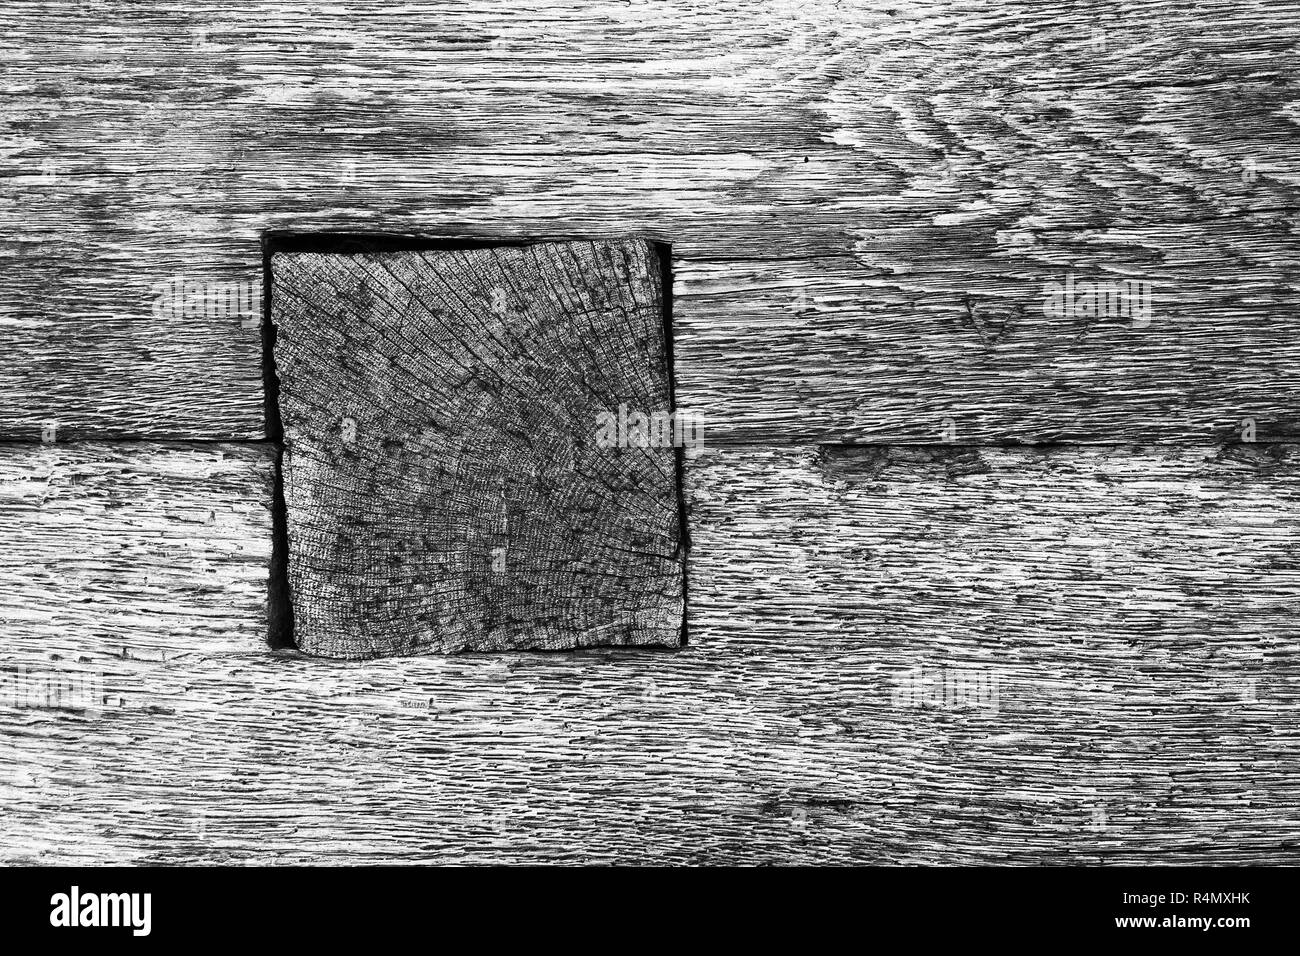 detail of wooden beam joint on old log house, black and white textural image Stock Photo